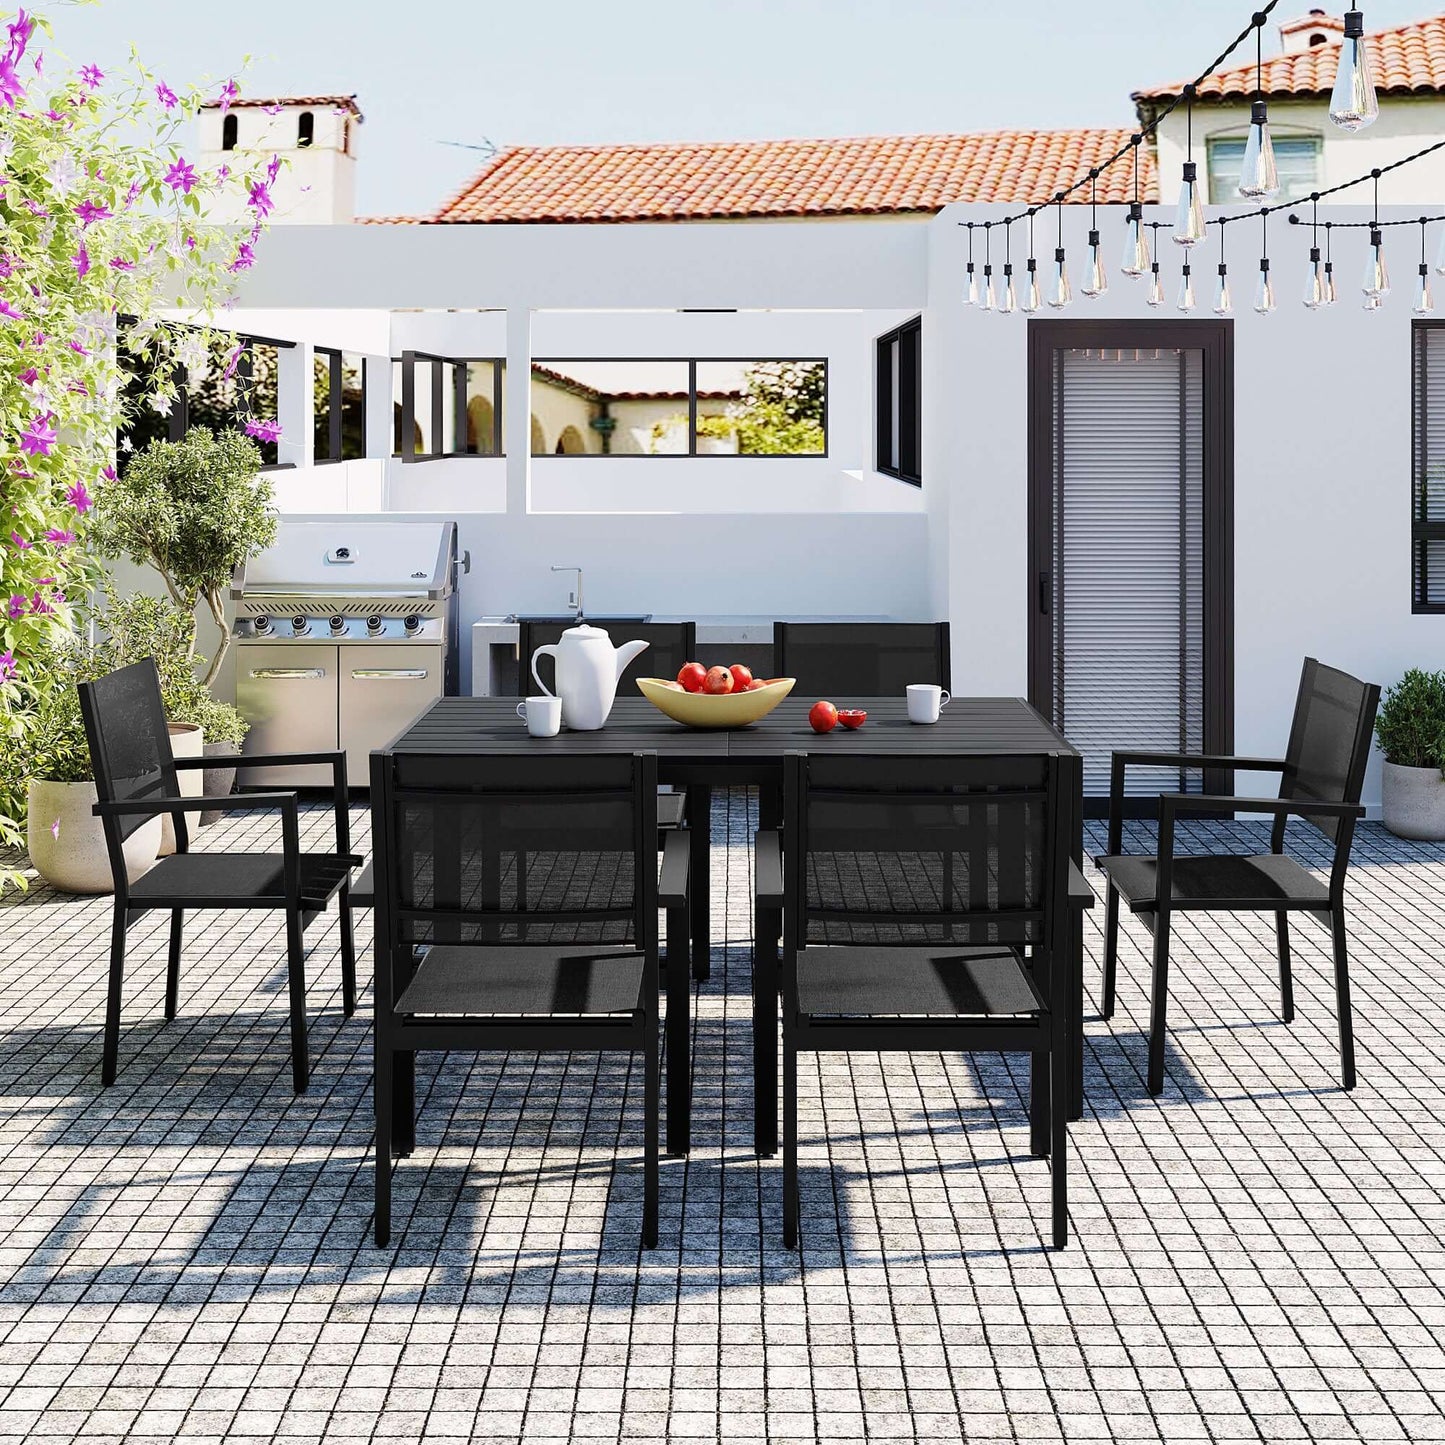 U-Style High-quality Steel Outdoor Table and Chair Set, Suitable for Patio, Balcony, Backyard.